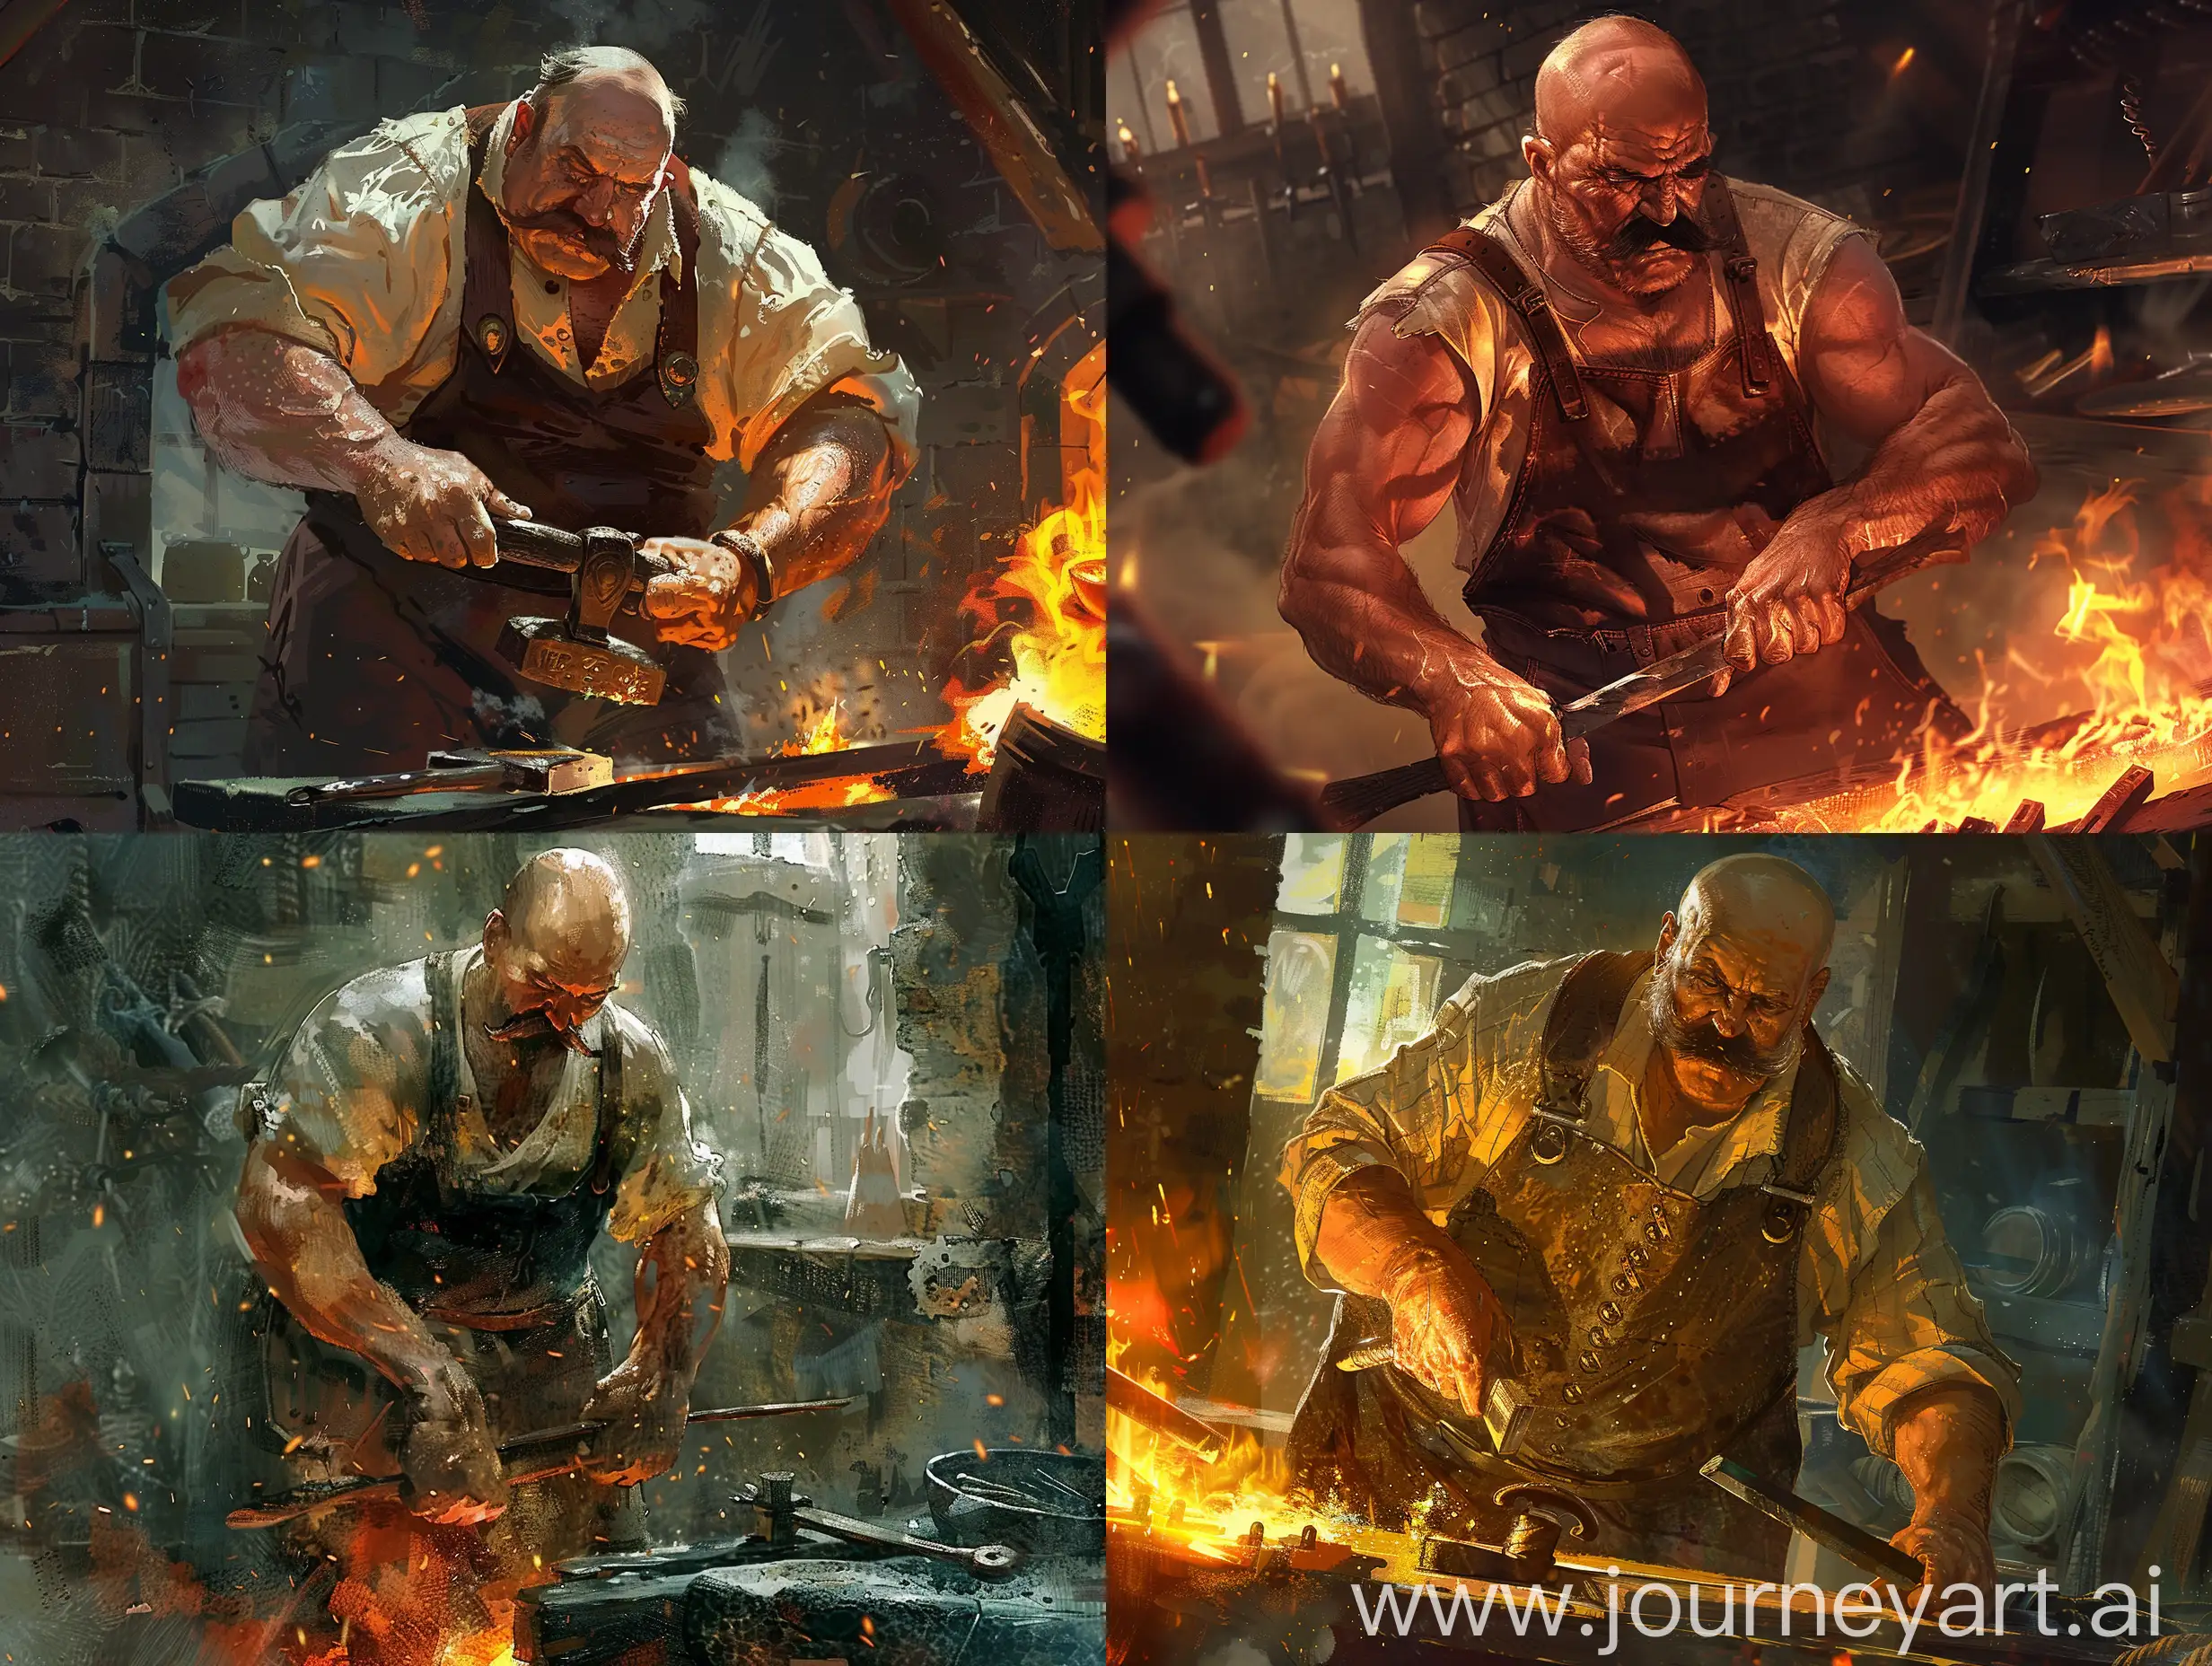 Create a vivid scene for an illustration featuring a 50-year-old blacksmith in the early 20th century, living in a rural European community. He is very strong and exceptionally large, wearing a leather apron and tight pants as he forges iron tools. The heat is palpable, with flames visible from his forge. He is bald with a stylish mustache and a ducktail goatee. Highlight his massive arms and enormous hands as he works, capturing the intensity and craftsmanship of his trade in the rustic setting.